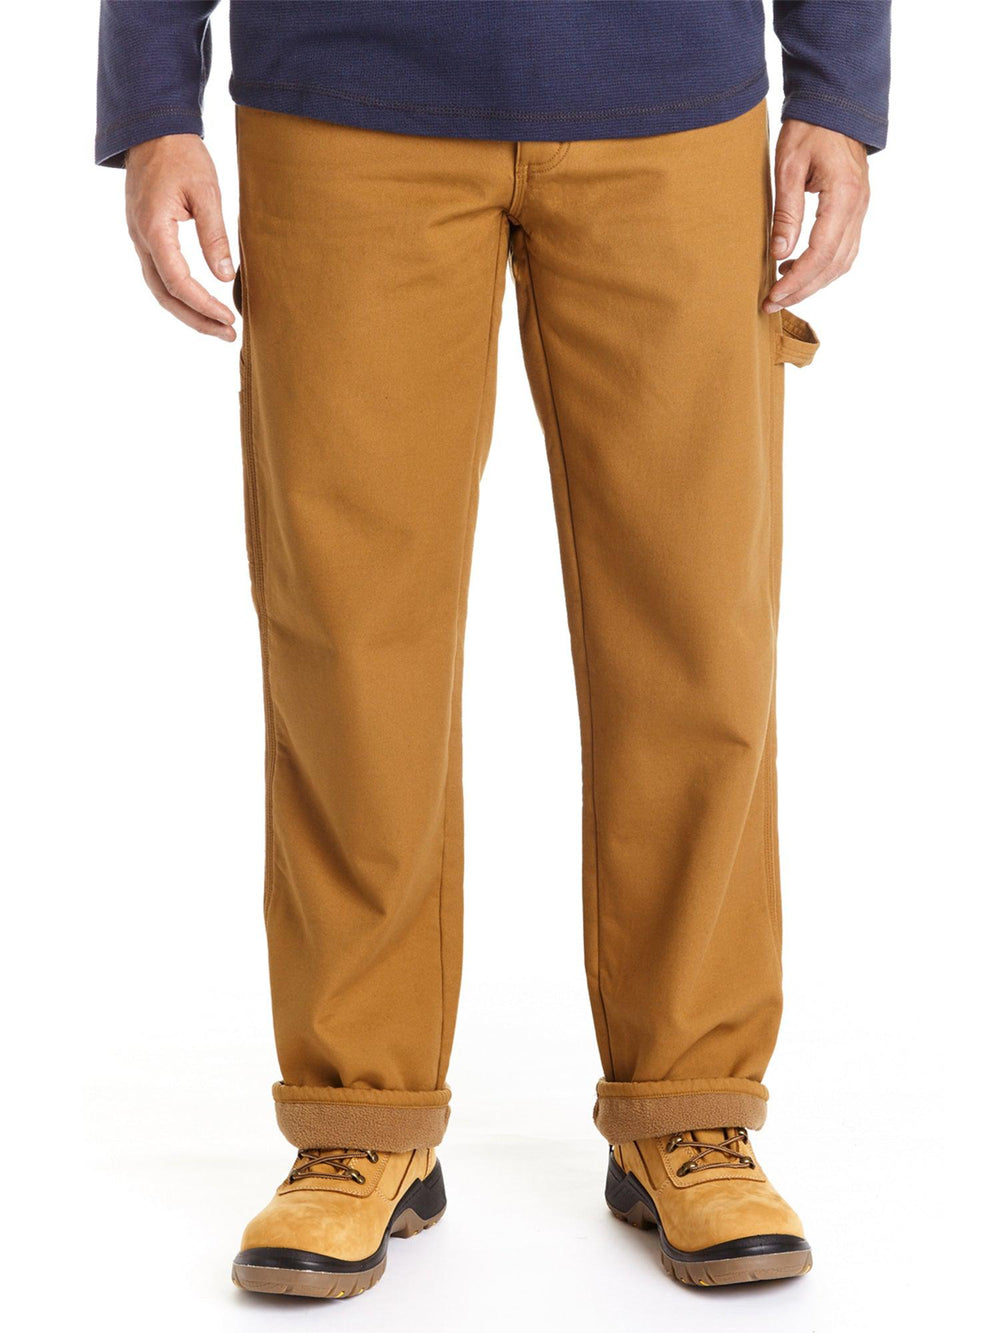 Men's Guide To Styling Carpenter Pants This Summer